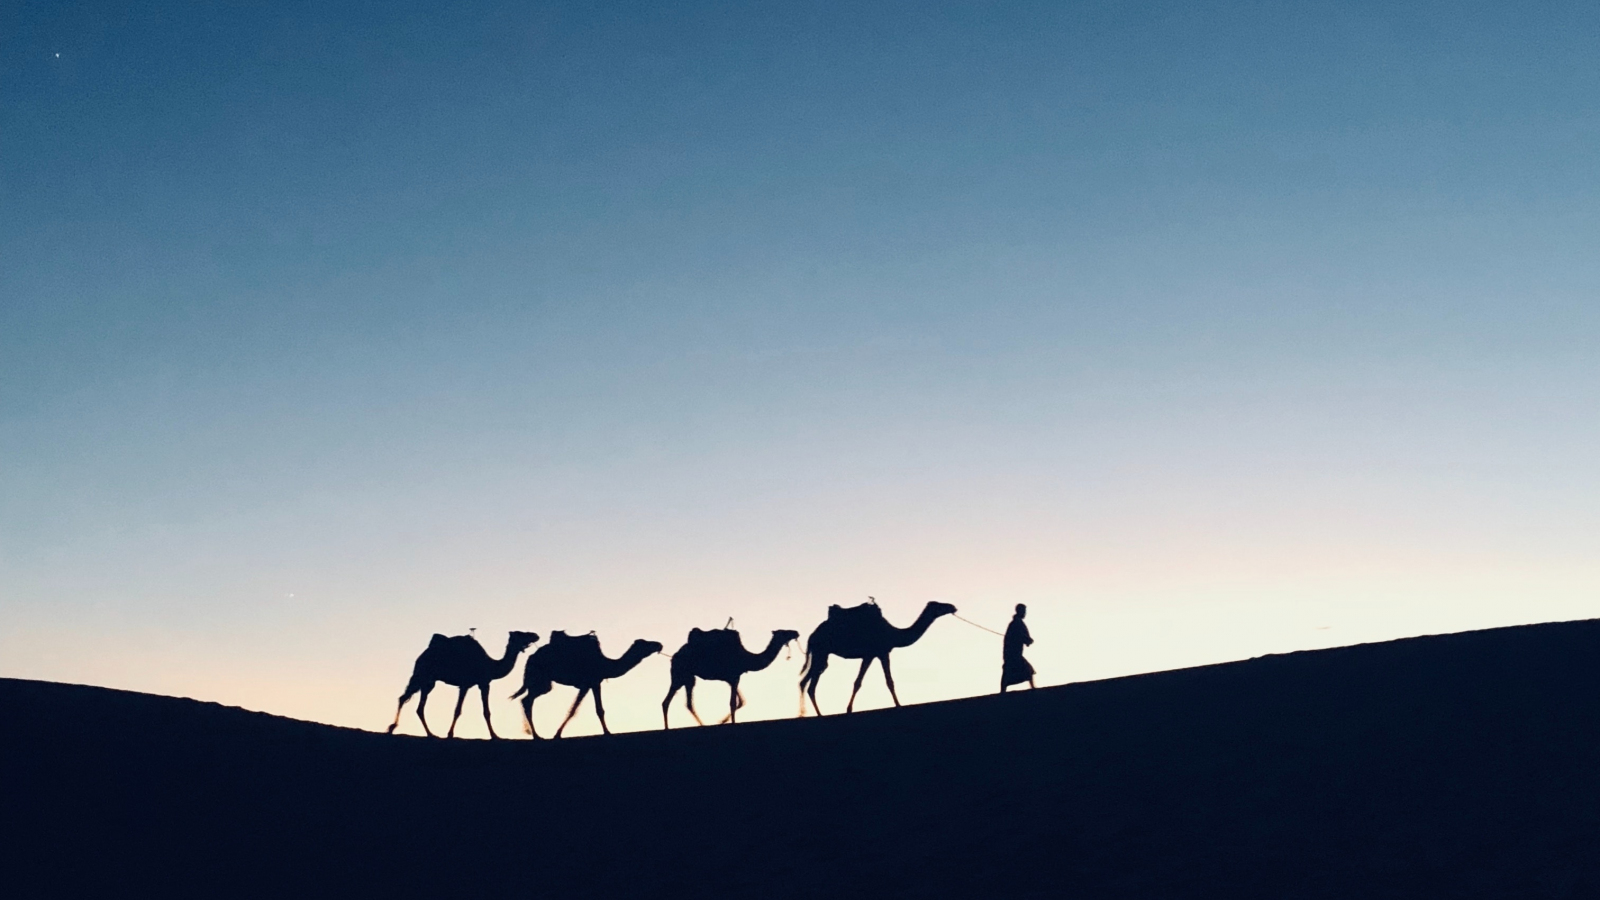 Silhouette, sunset, camel, Morocco, 1600x900 wallpaper